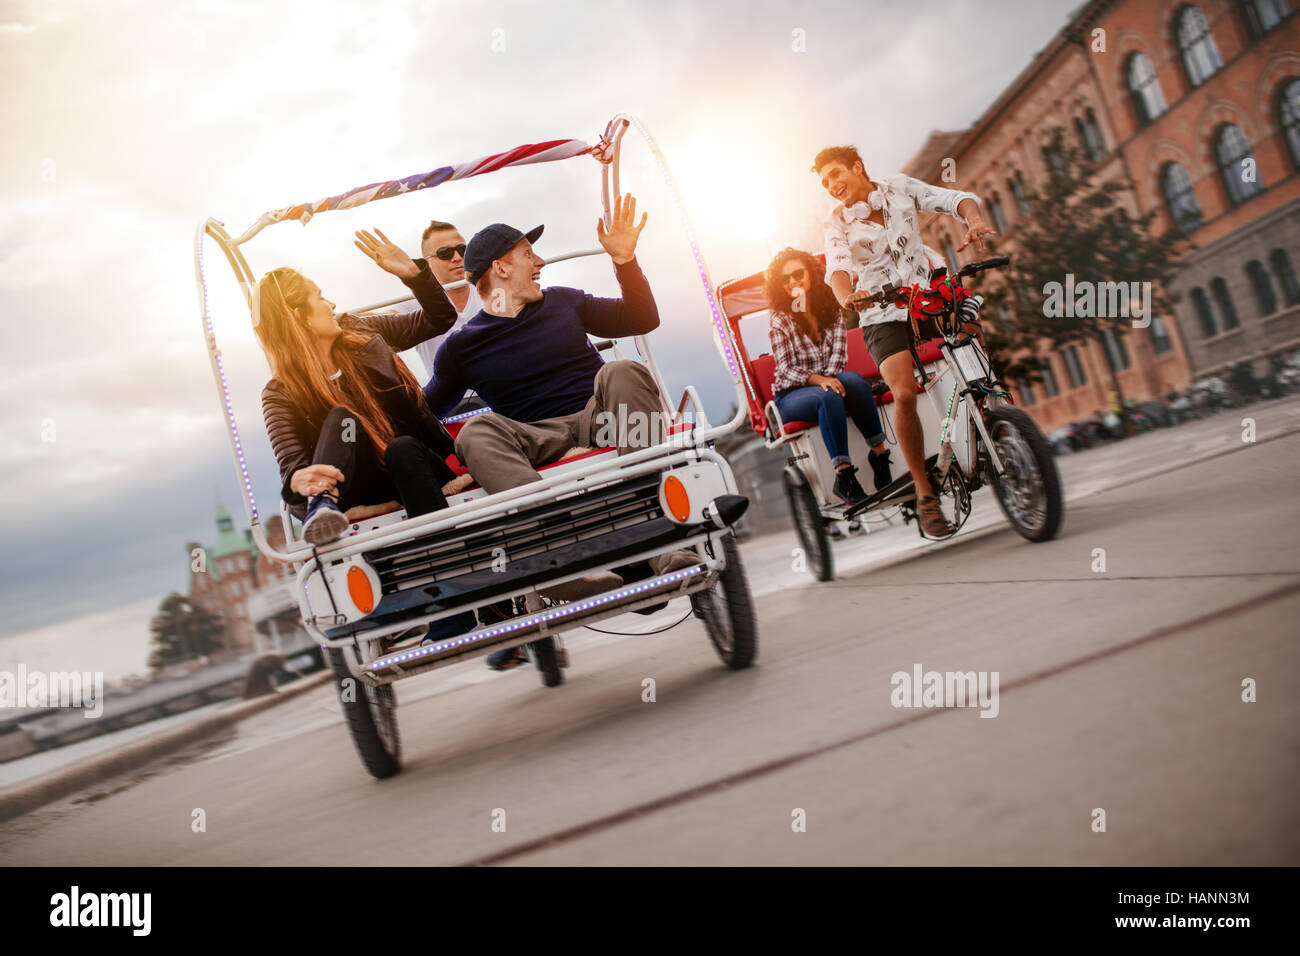 Group of friends having fun with two tricycles on road. Teenagers on tricycle ride on city street. Stock Photo